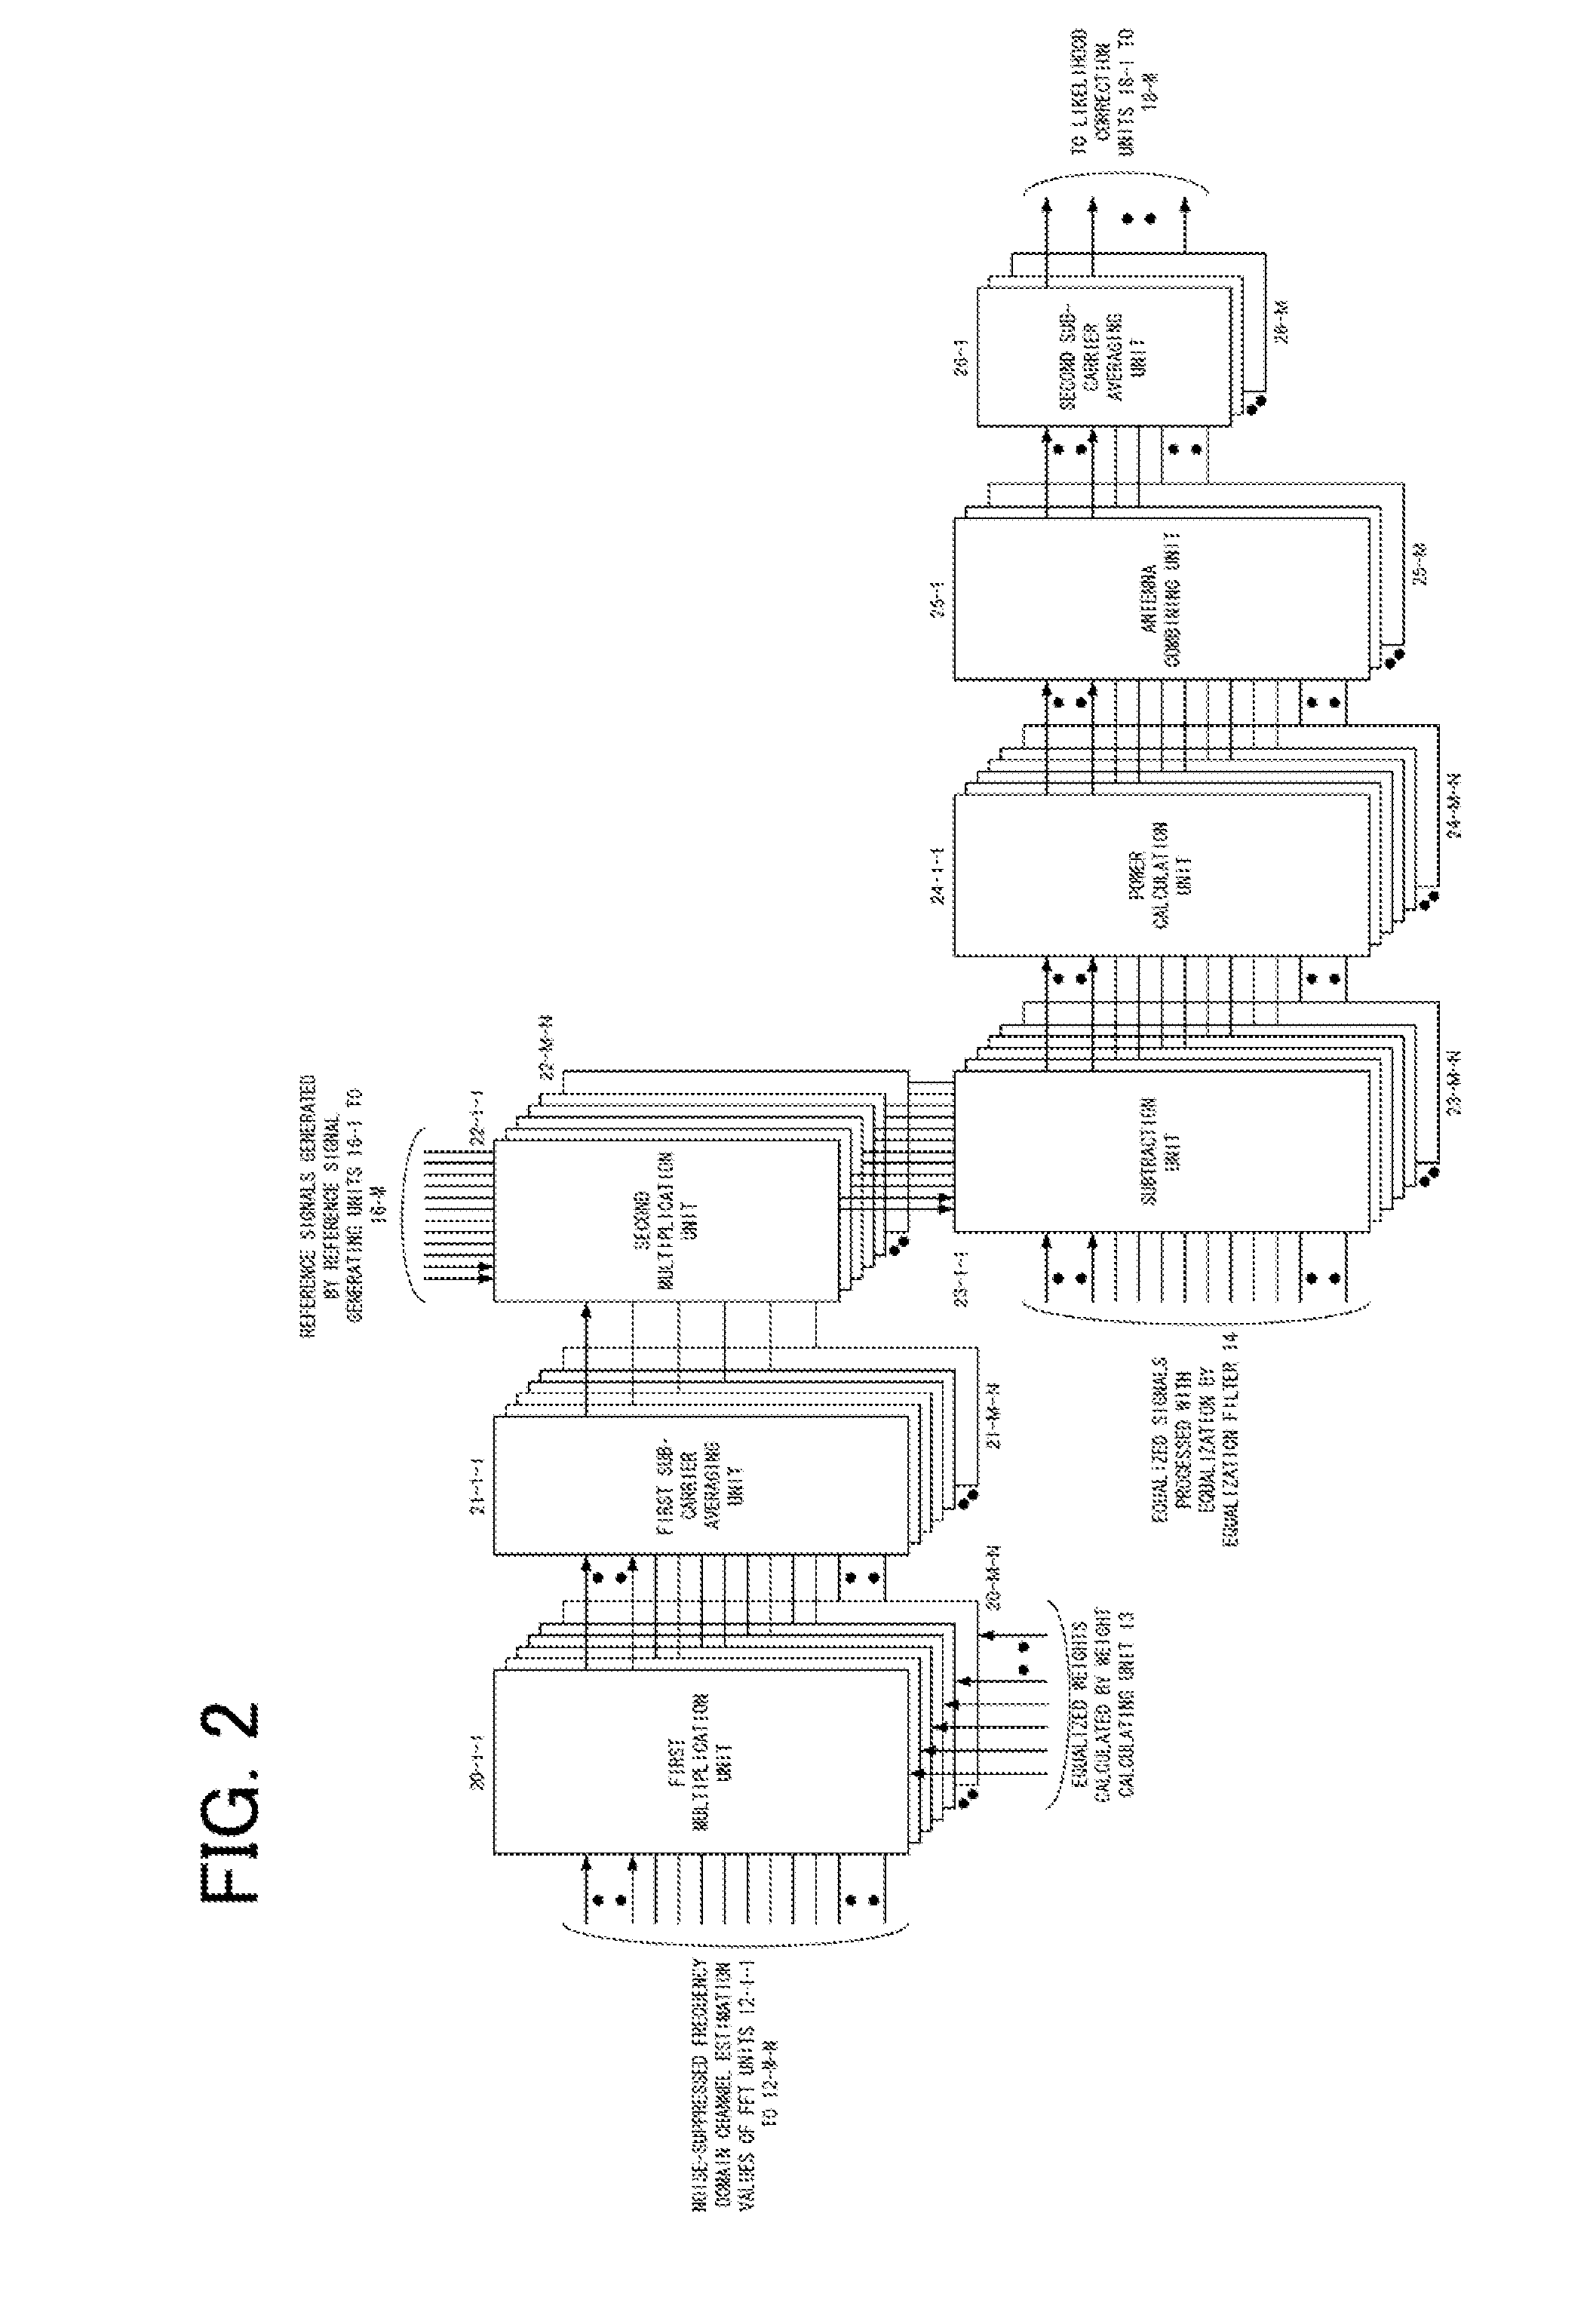 Receiving apparatus and method